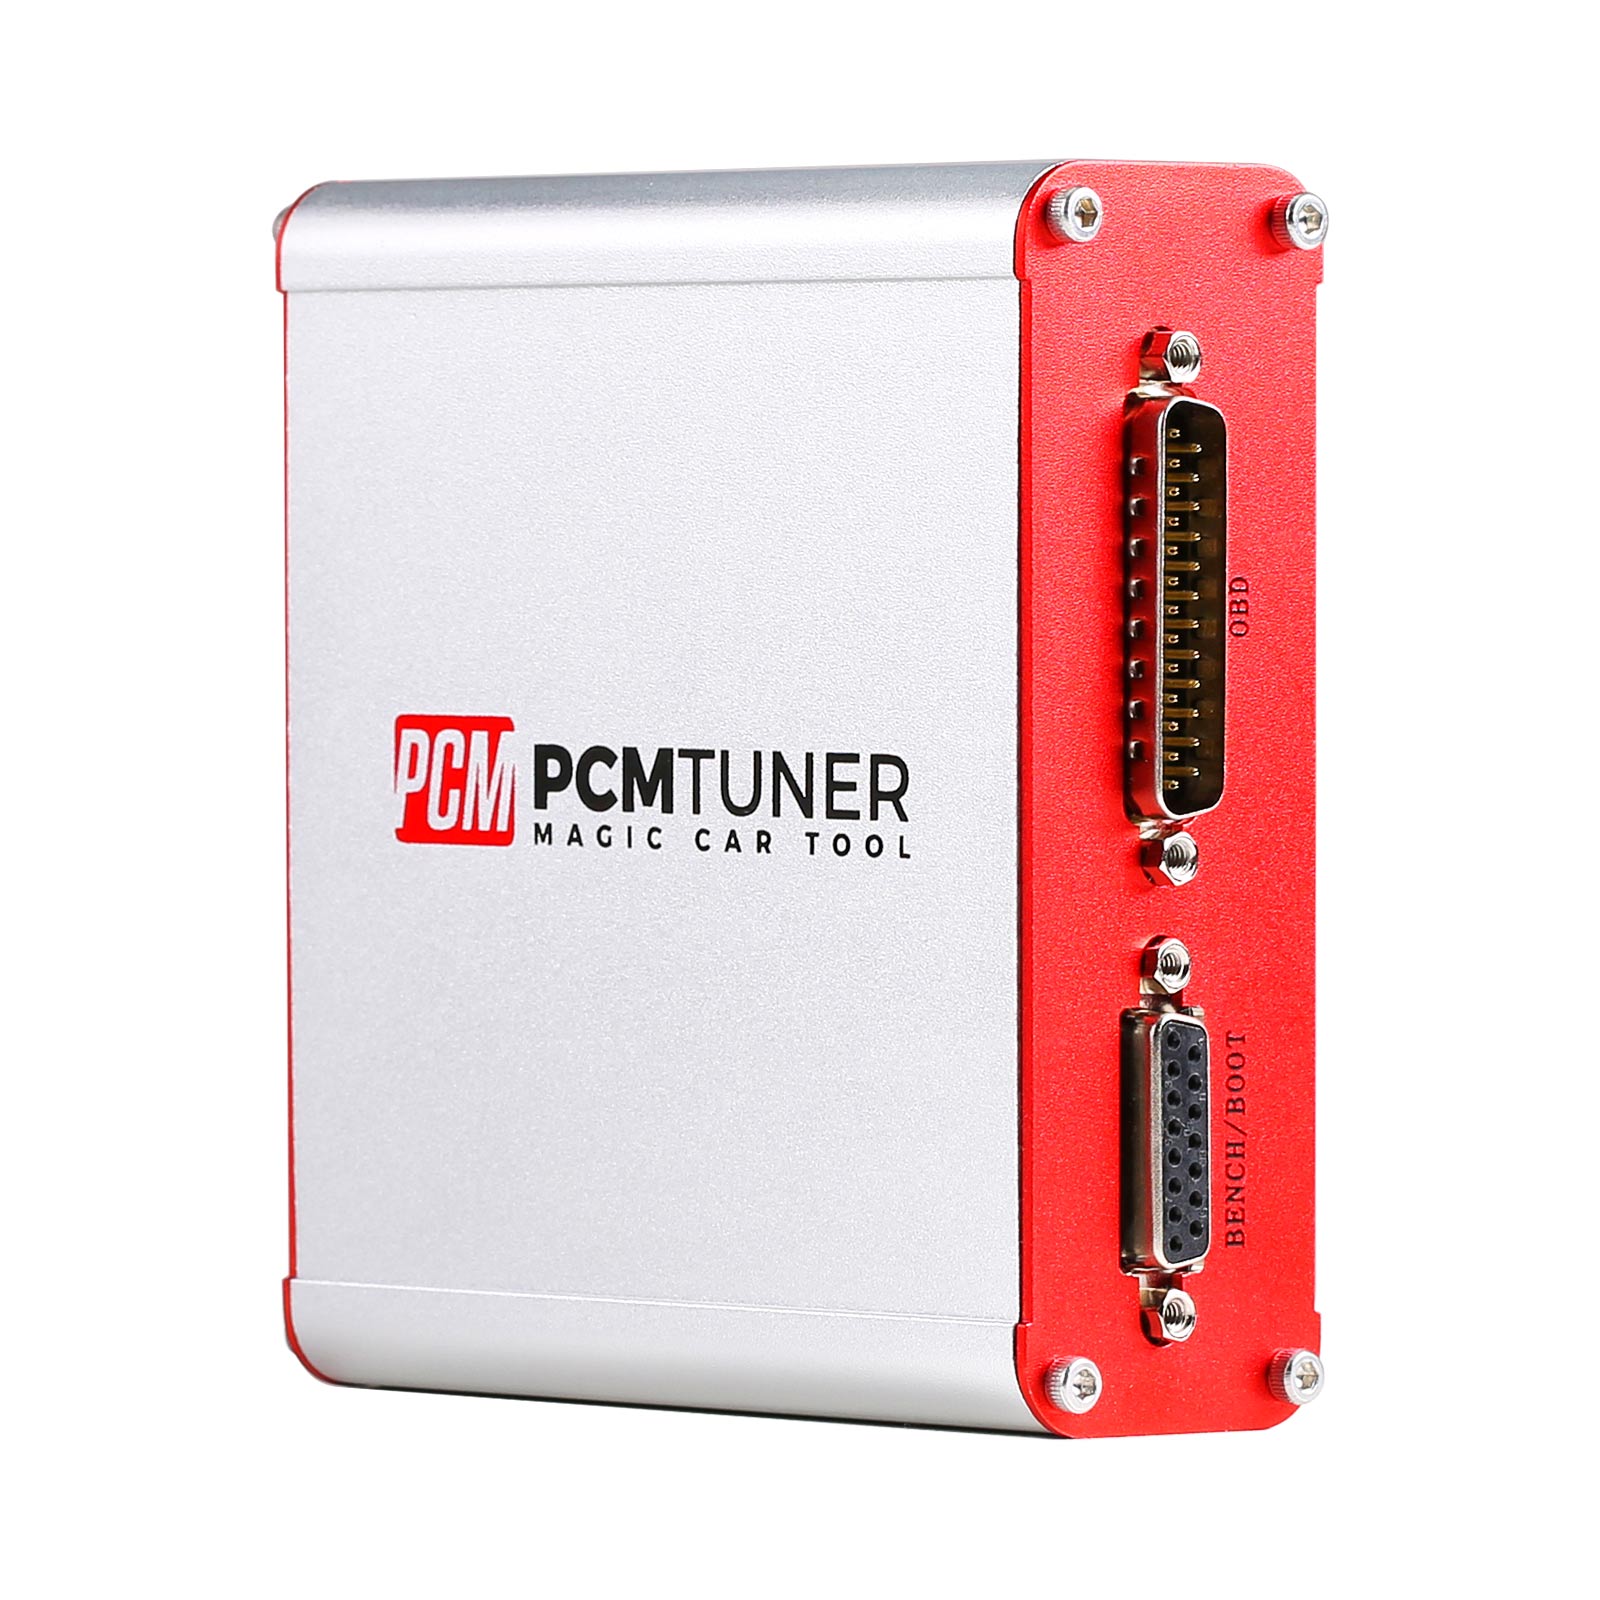 V1.27 PCMtuner ECU Chip Tuning Tool with 67 Software Modules Supports Online Update